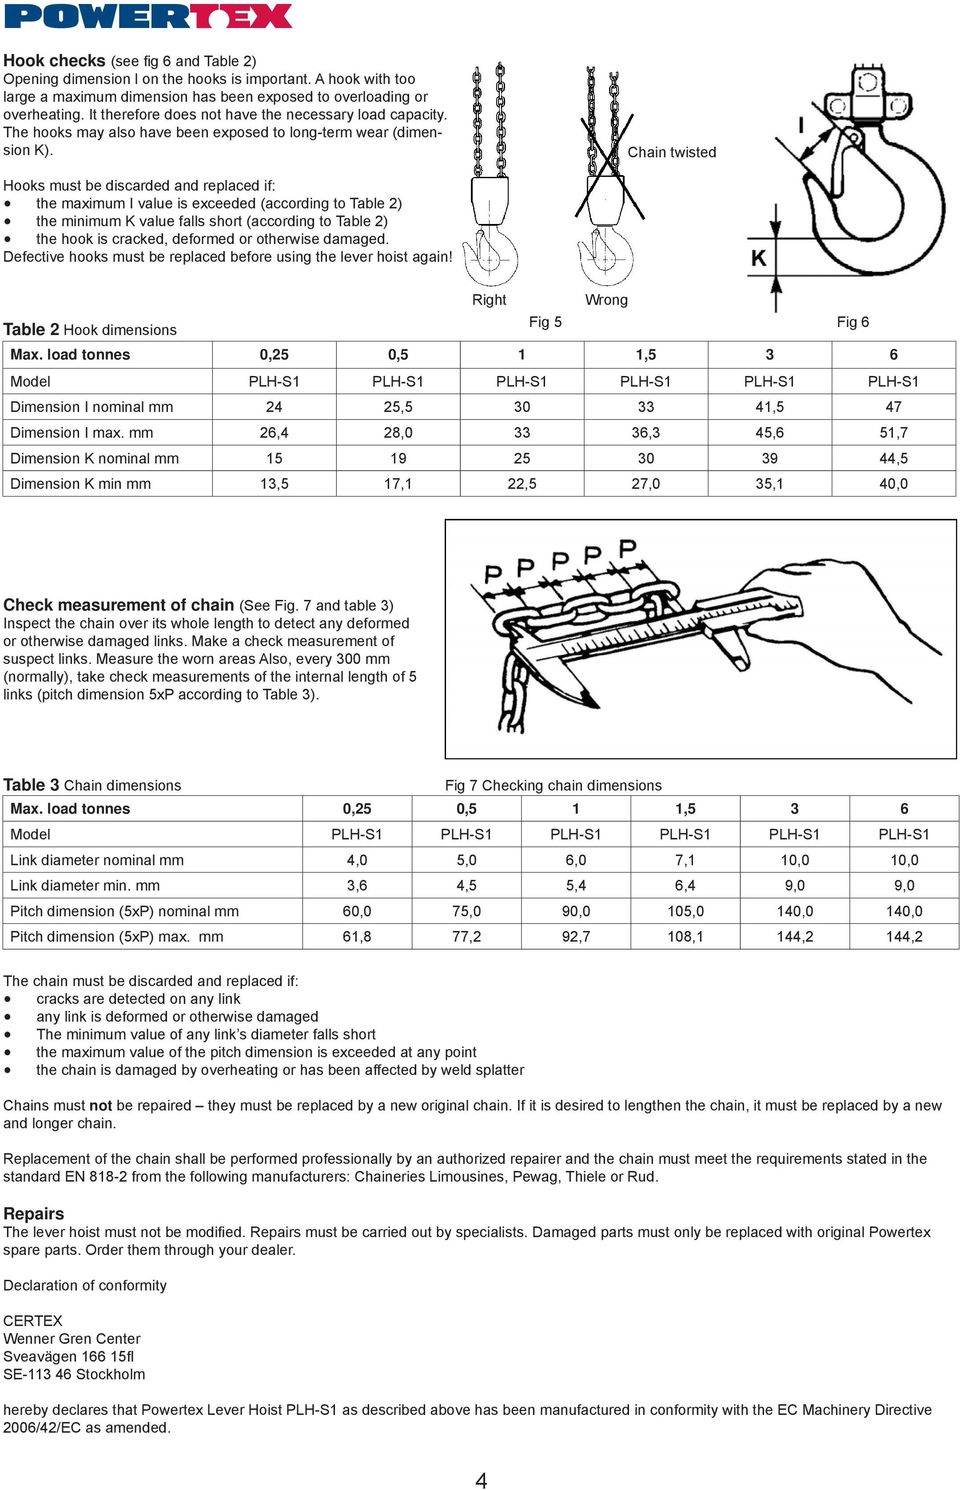 Chain twisted Hooks must be discarded and replaced if: the maximum I value is exceeded (according to Table 2) the minimum K value falls short (according to Table 2) the hook is cracked, deformed or